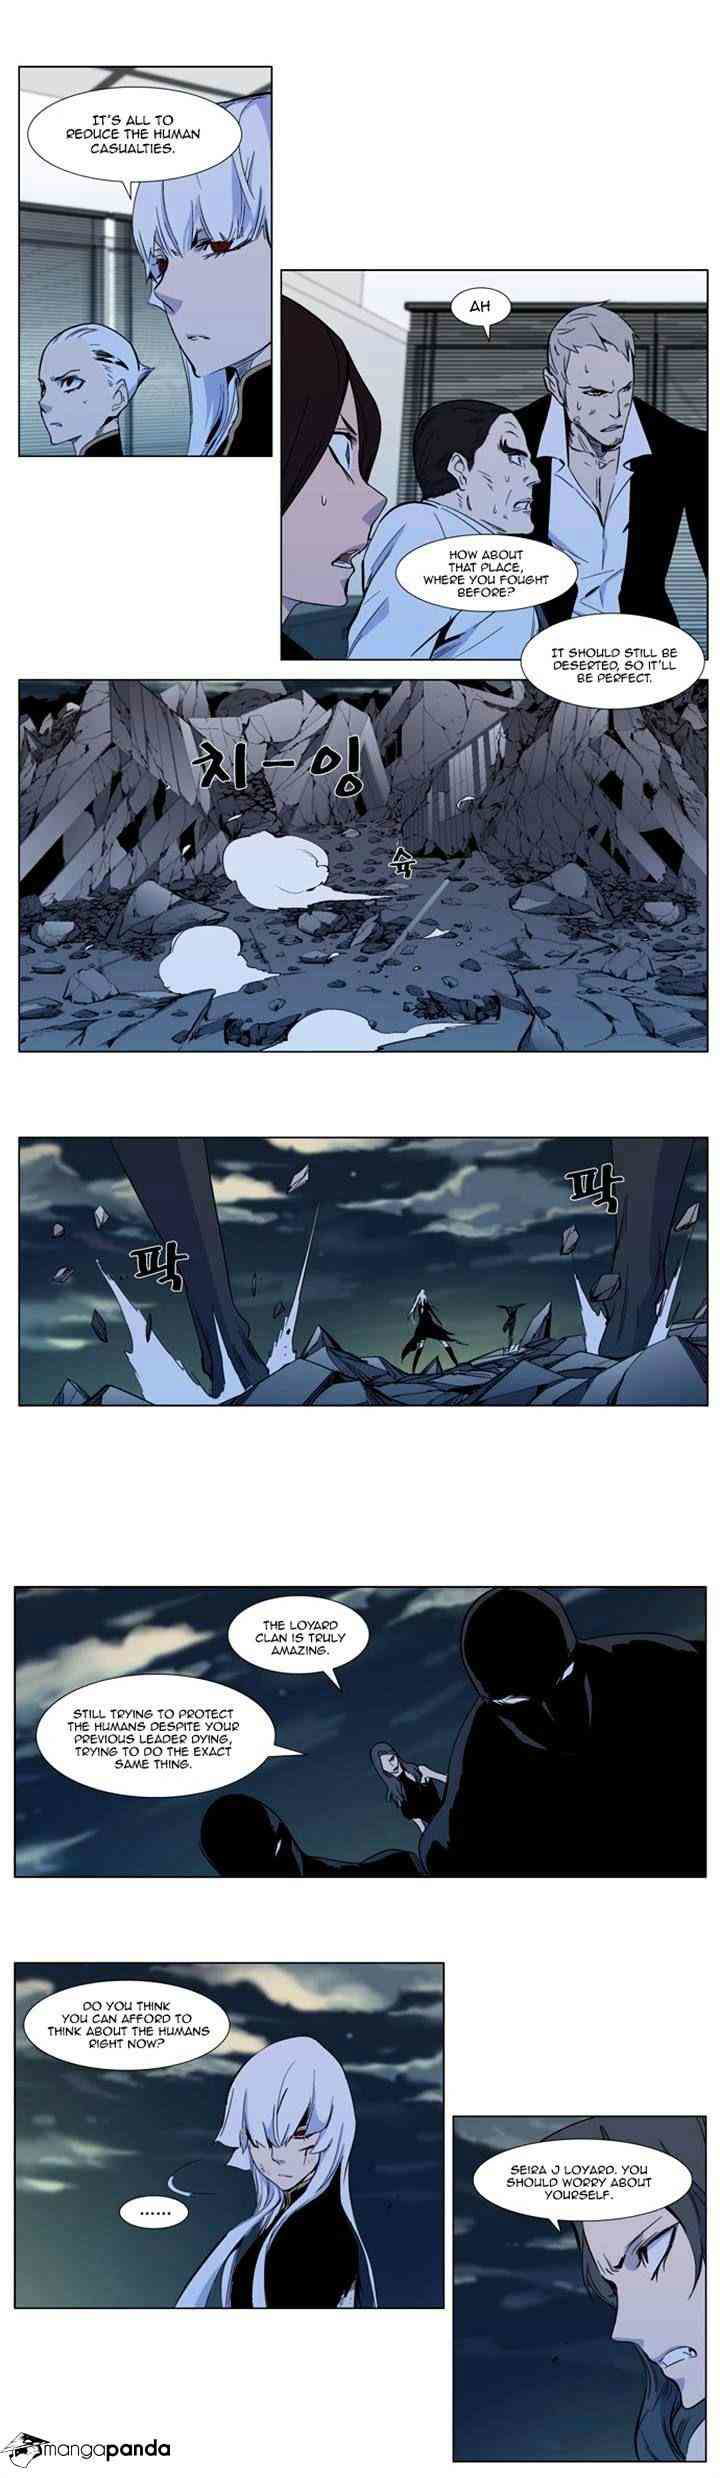 Noblesse Chapter 300 page 7